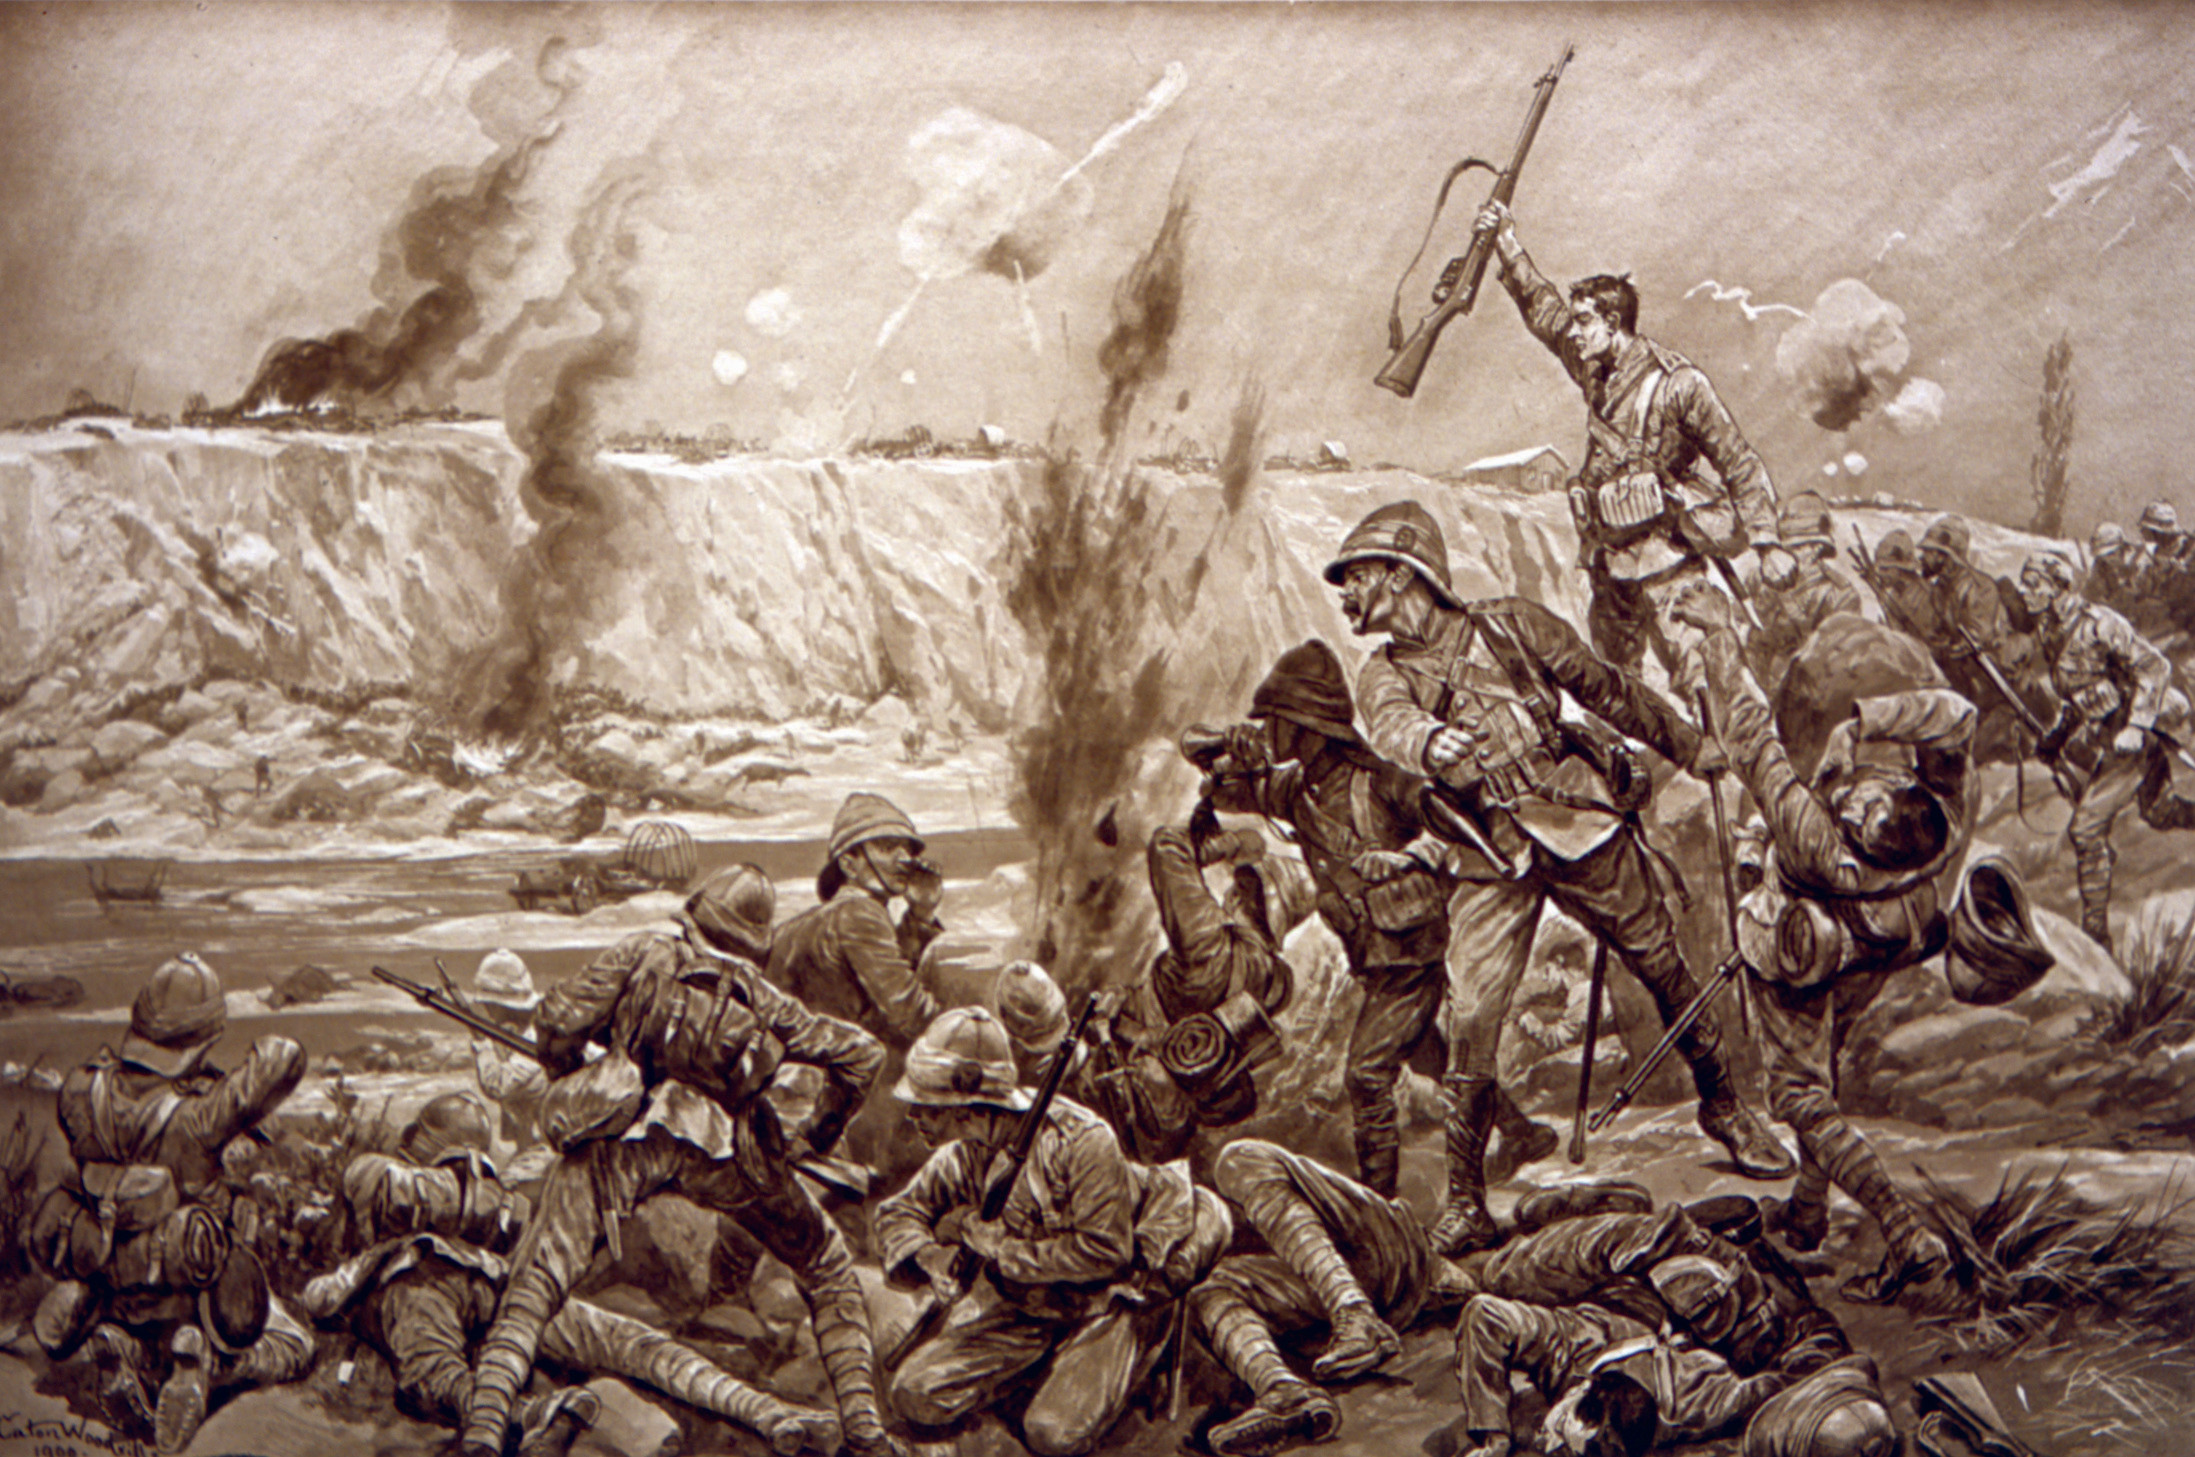 British troops assault the heavily defended Boer laager in artist Richard Caton Woodville’s painting, “Paardeberg.”